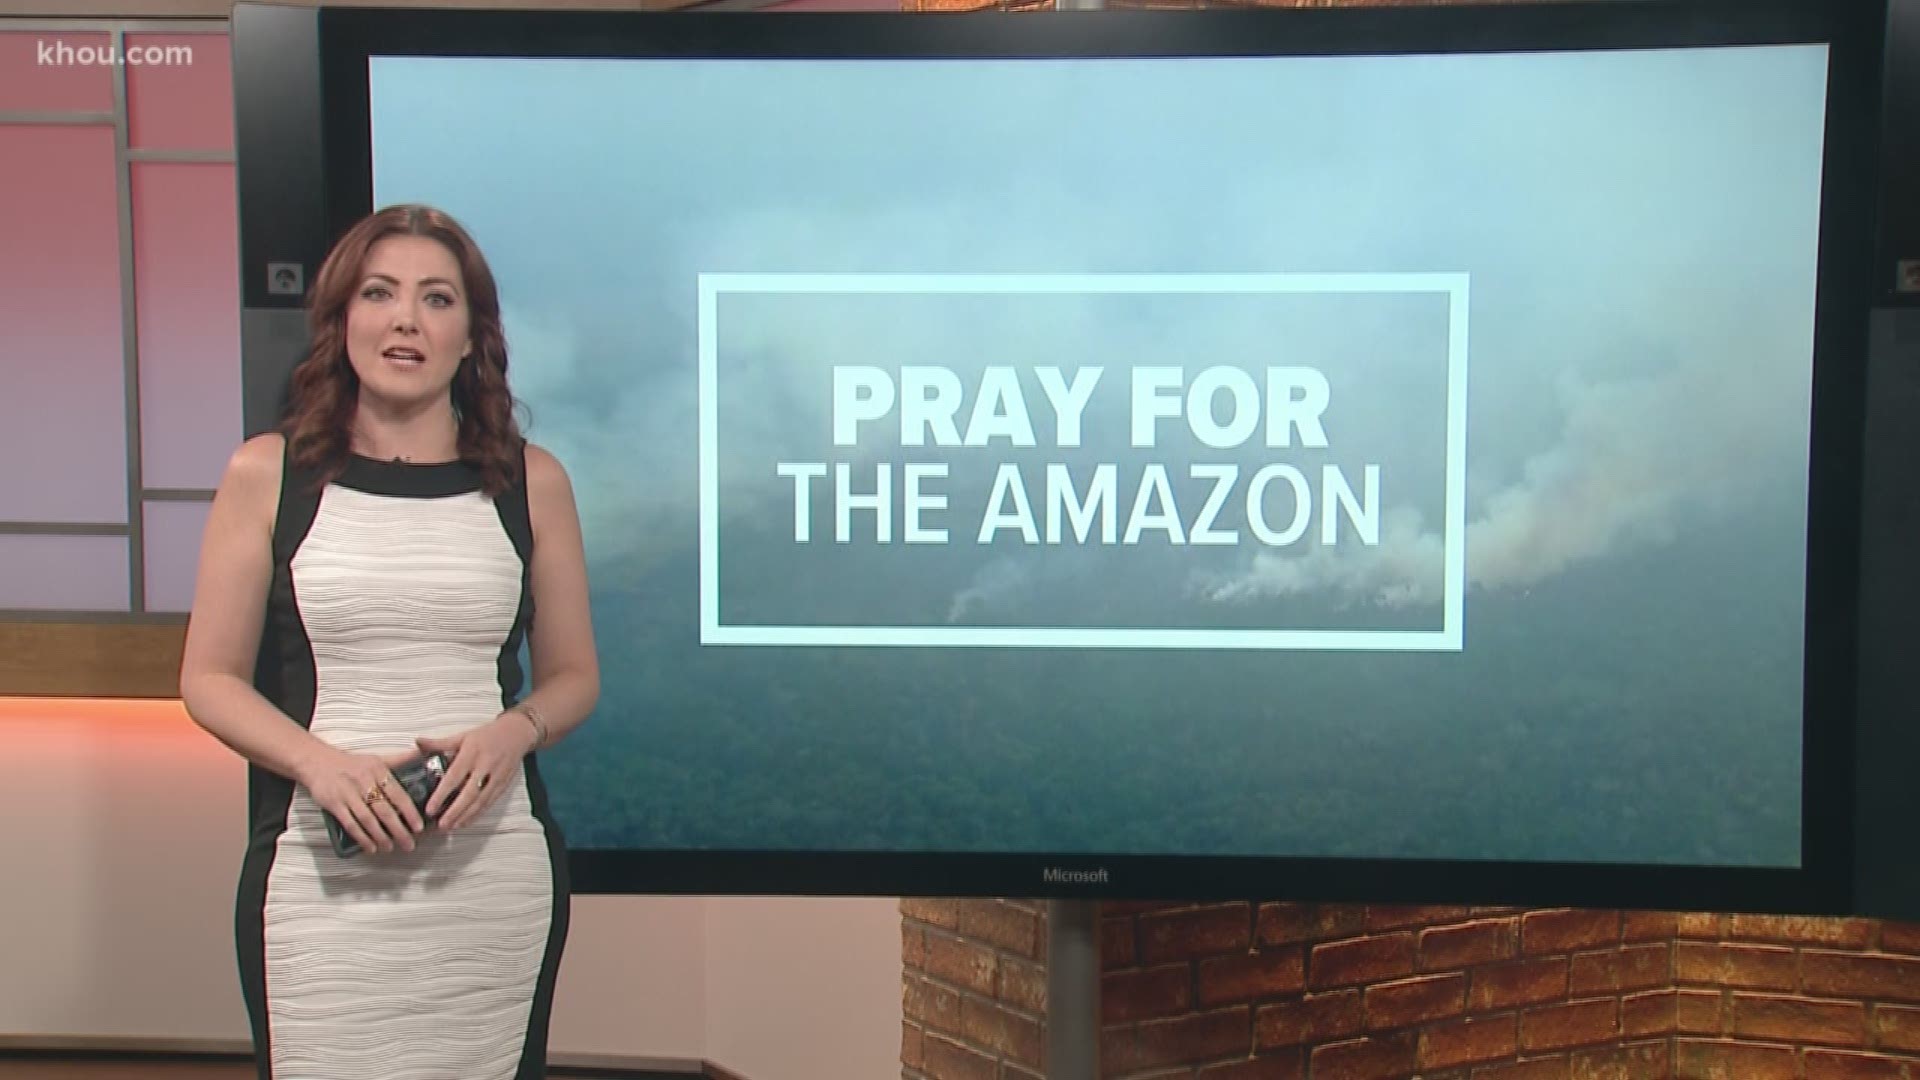 So many of you have messaged or posted – asking why wildfires in the Amazon aren't getting media coverage. And you are right – they're only just starting to get the attention they deserve as people spread the word, using the #PrayForTheAmazon.